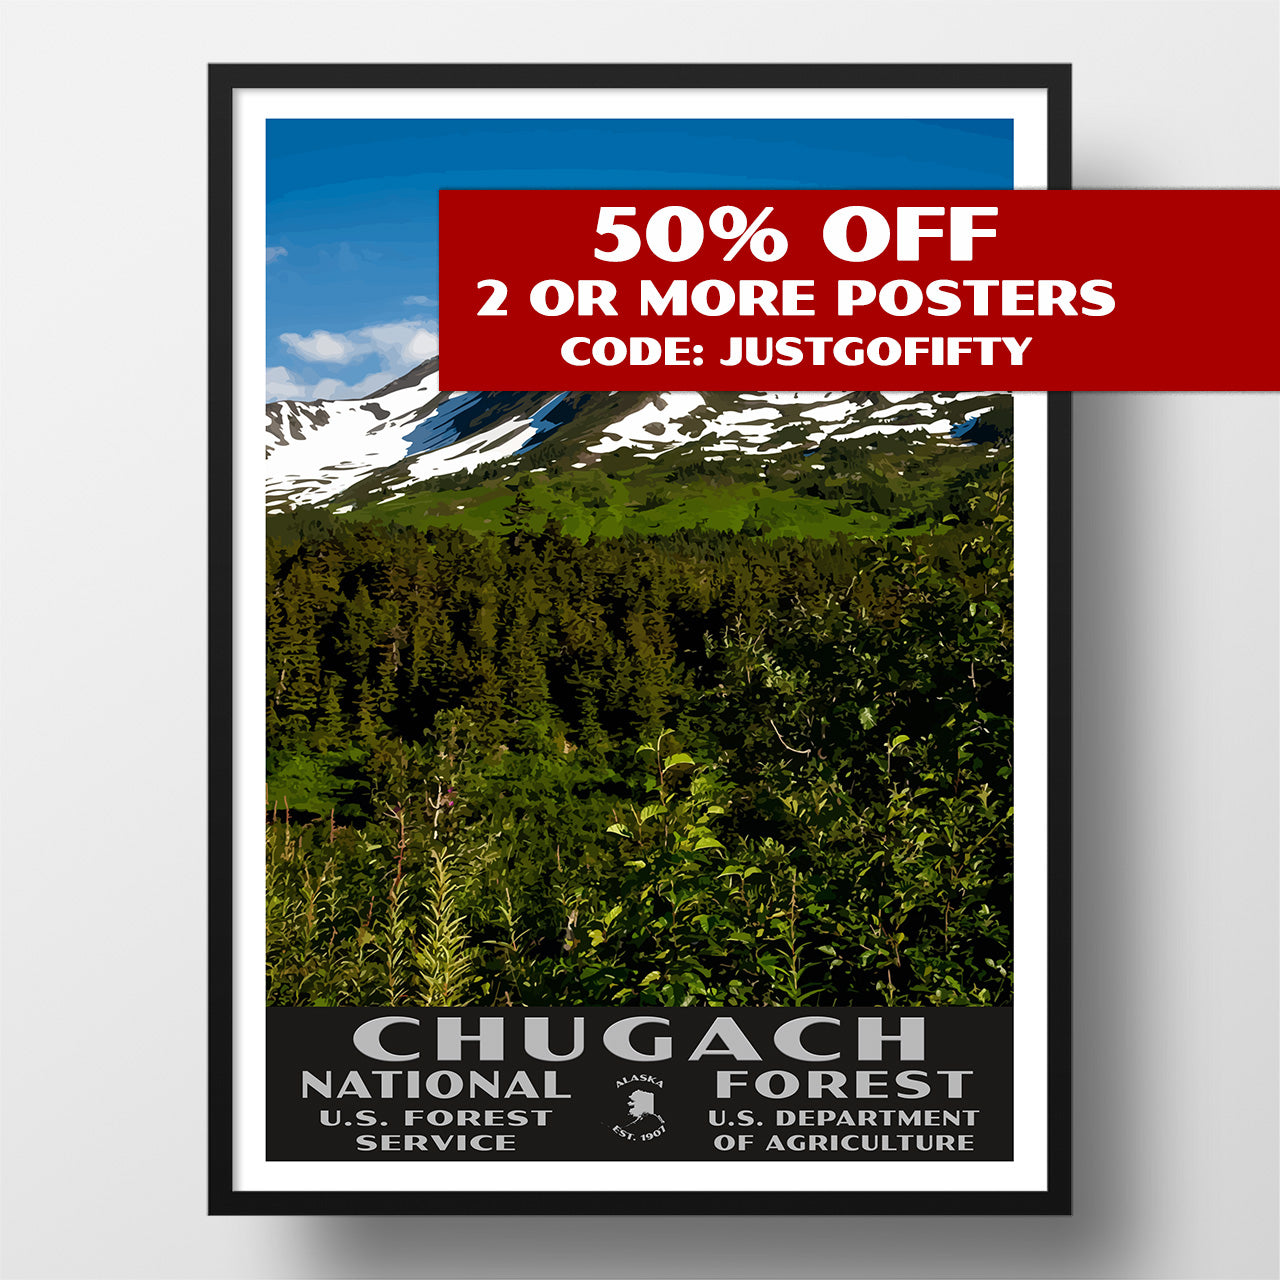 Chugach National Forest poster